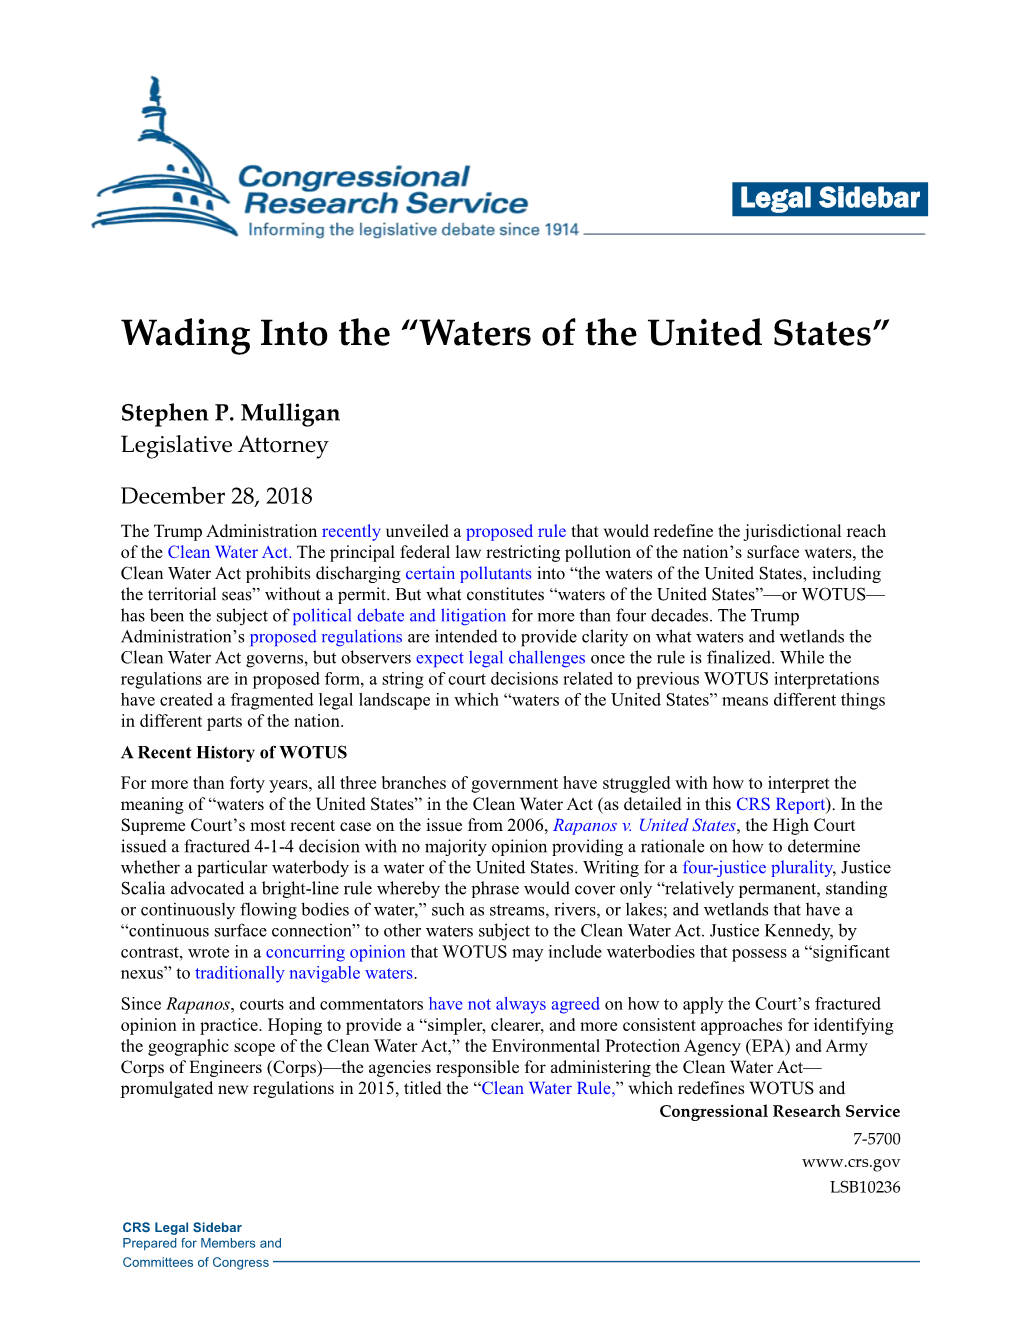 Wading Into the "Waters of the United States"